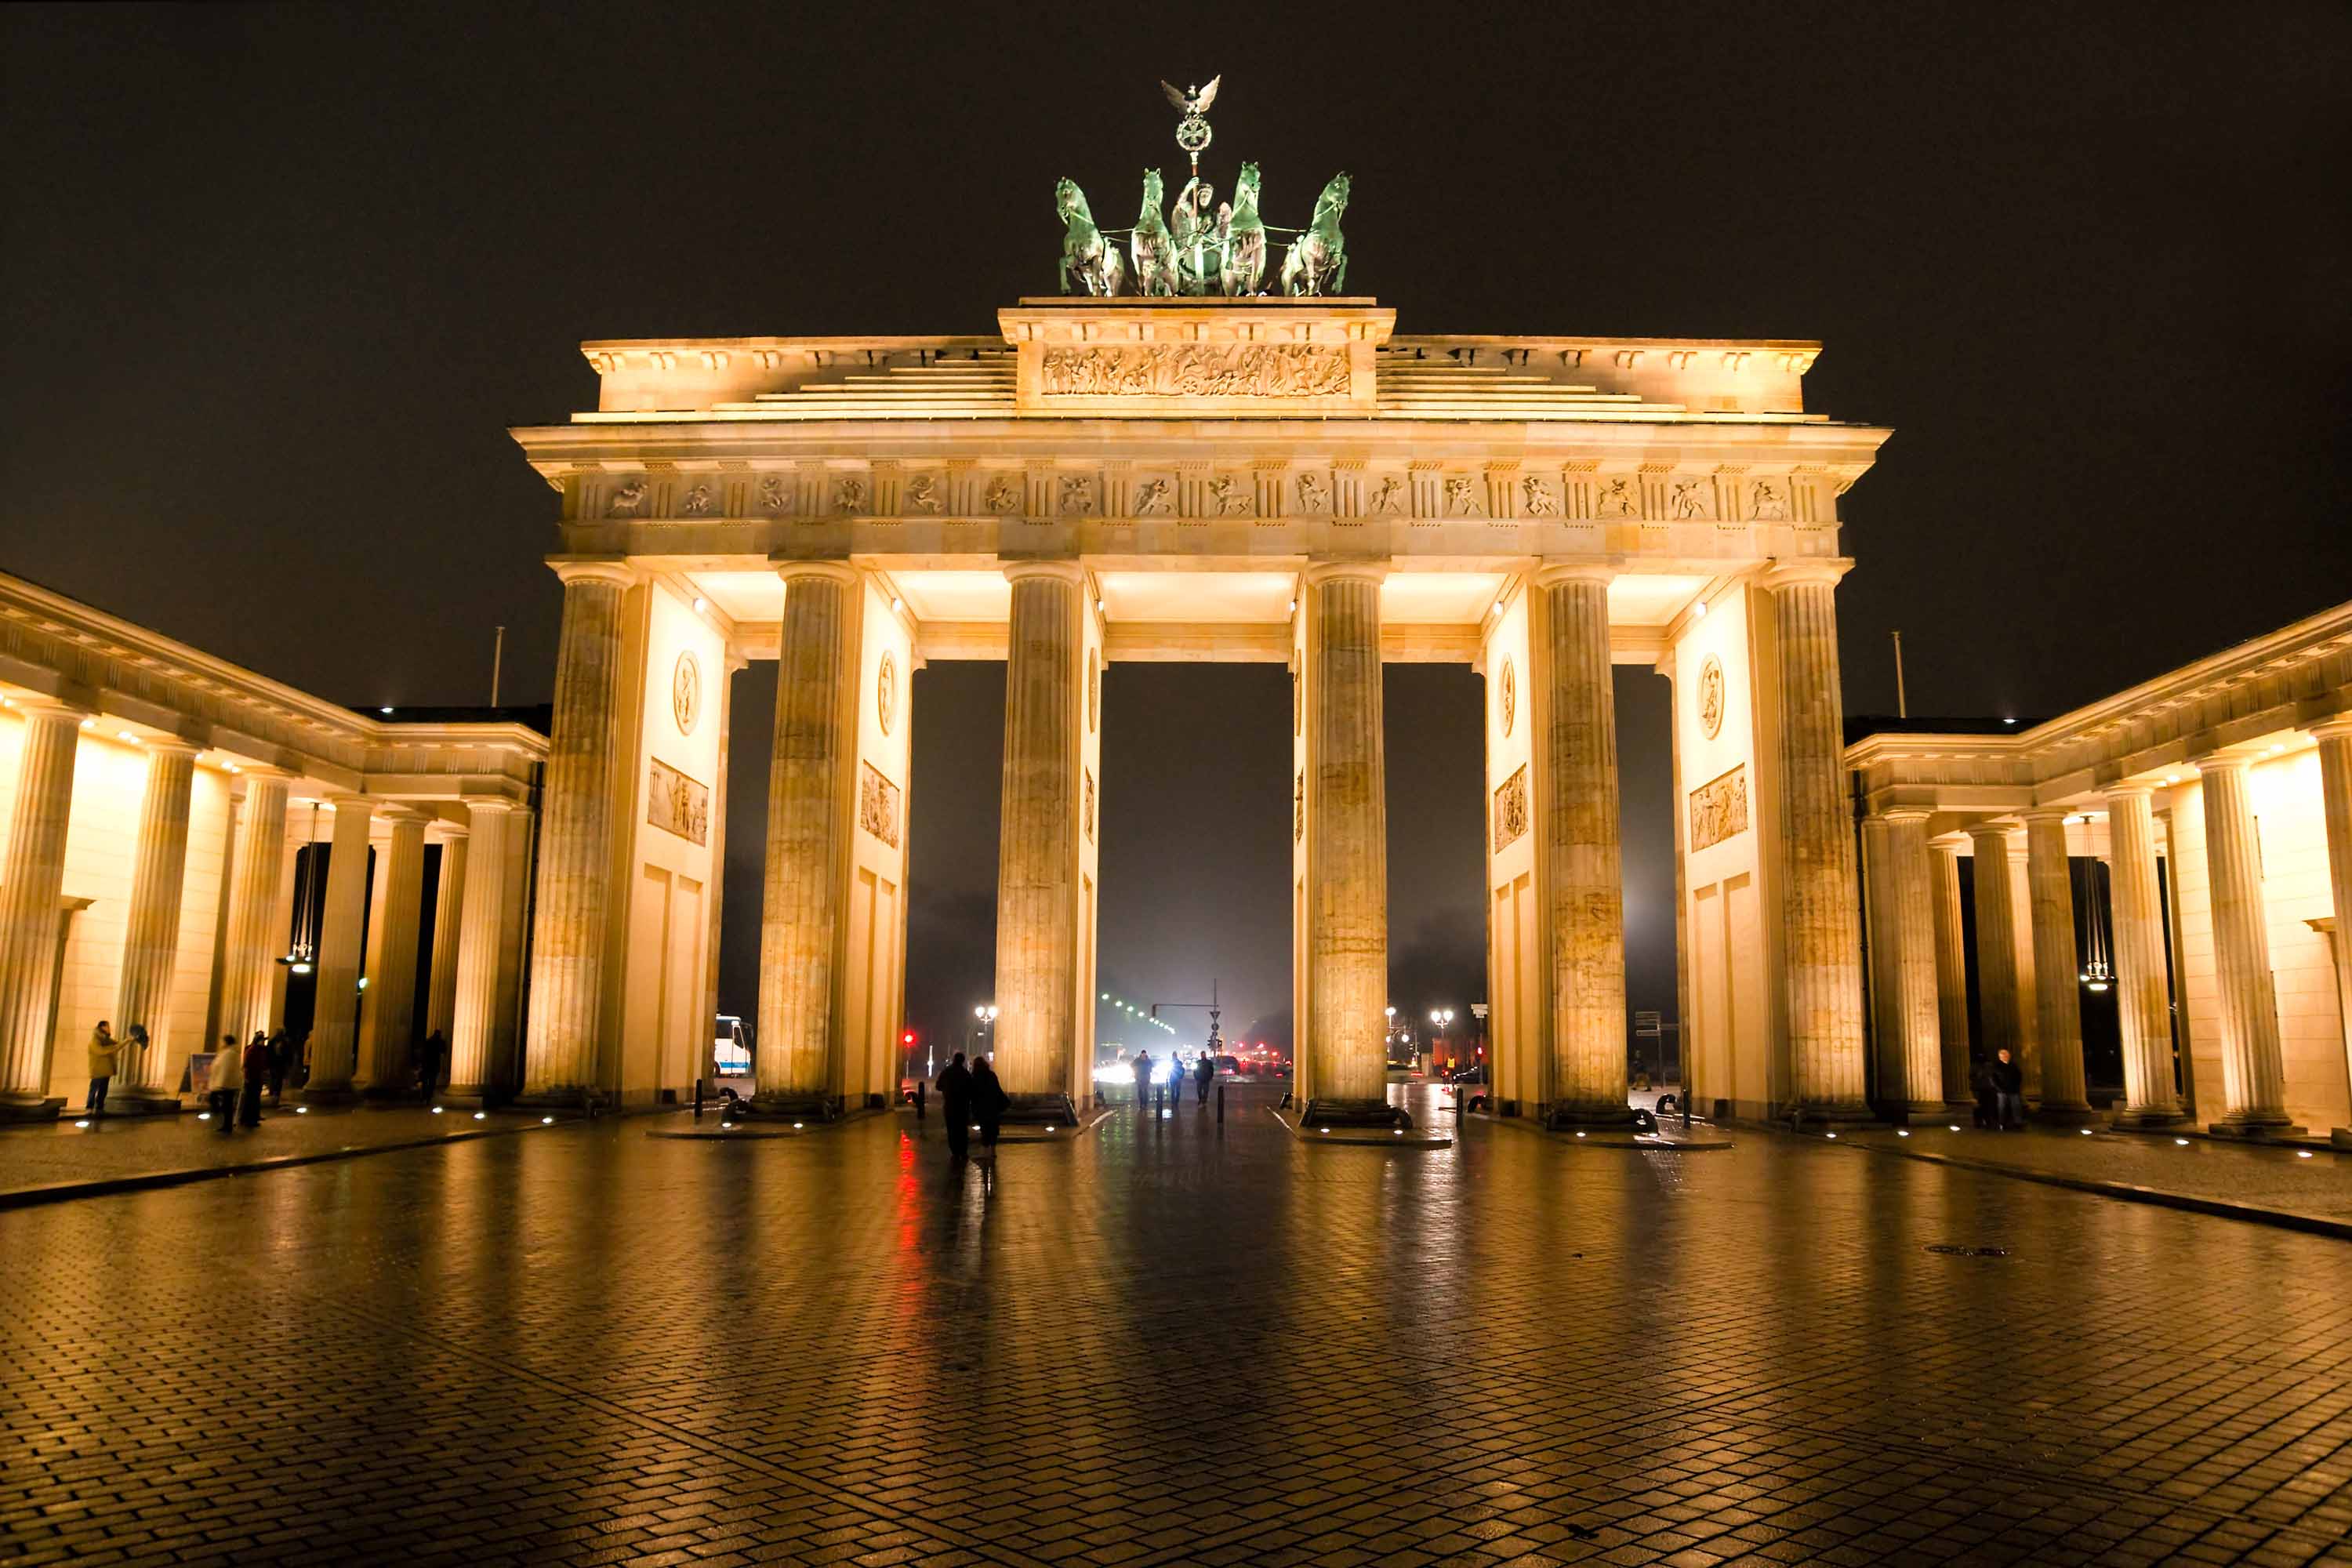 Brandenburg Gate, Berlin, Germany | Most Beautiful Places in the World